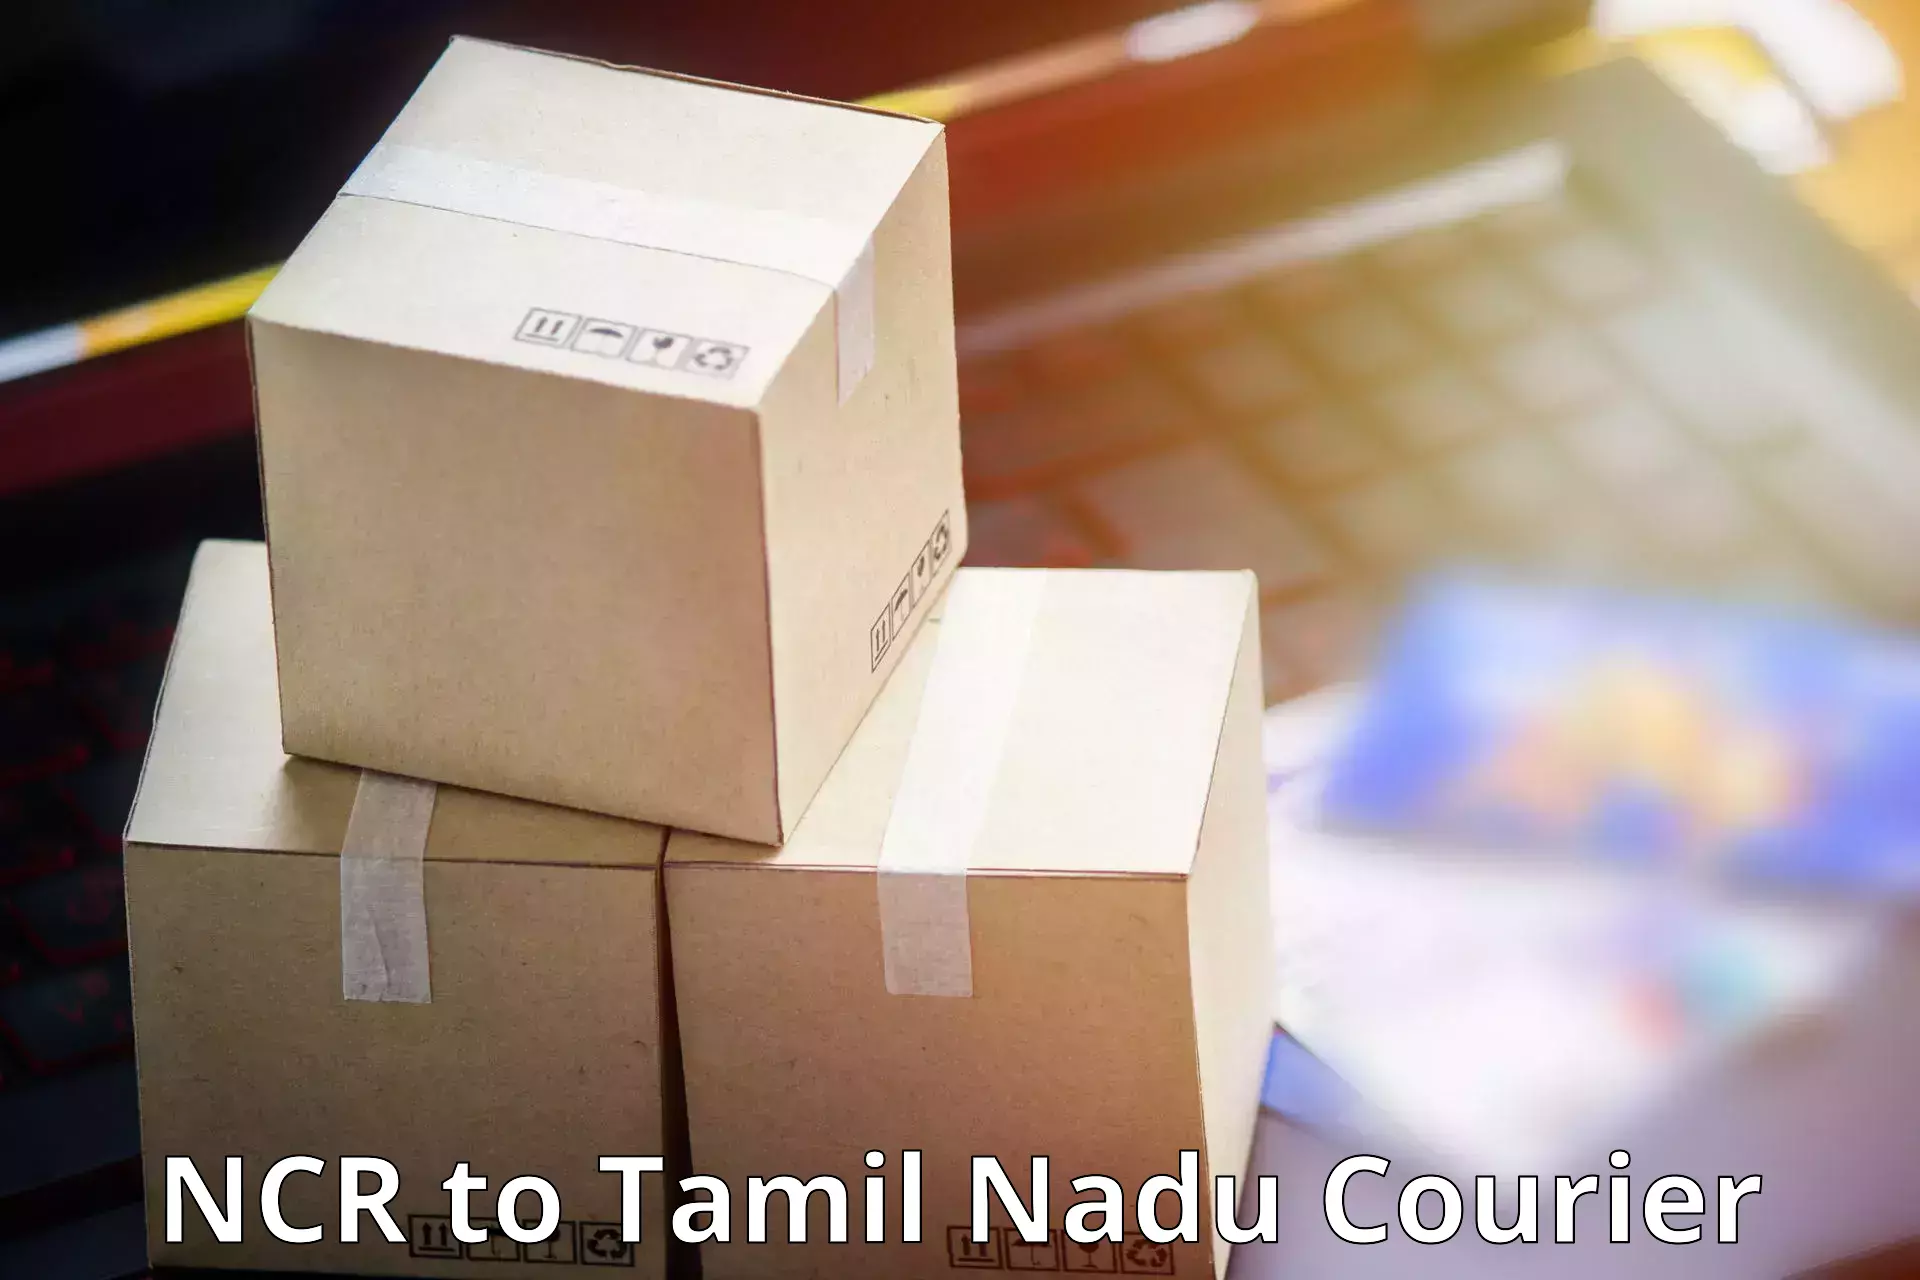 Next day courier NCR to Palayankottai